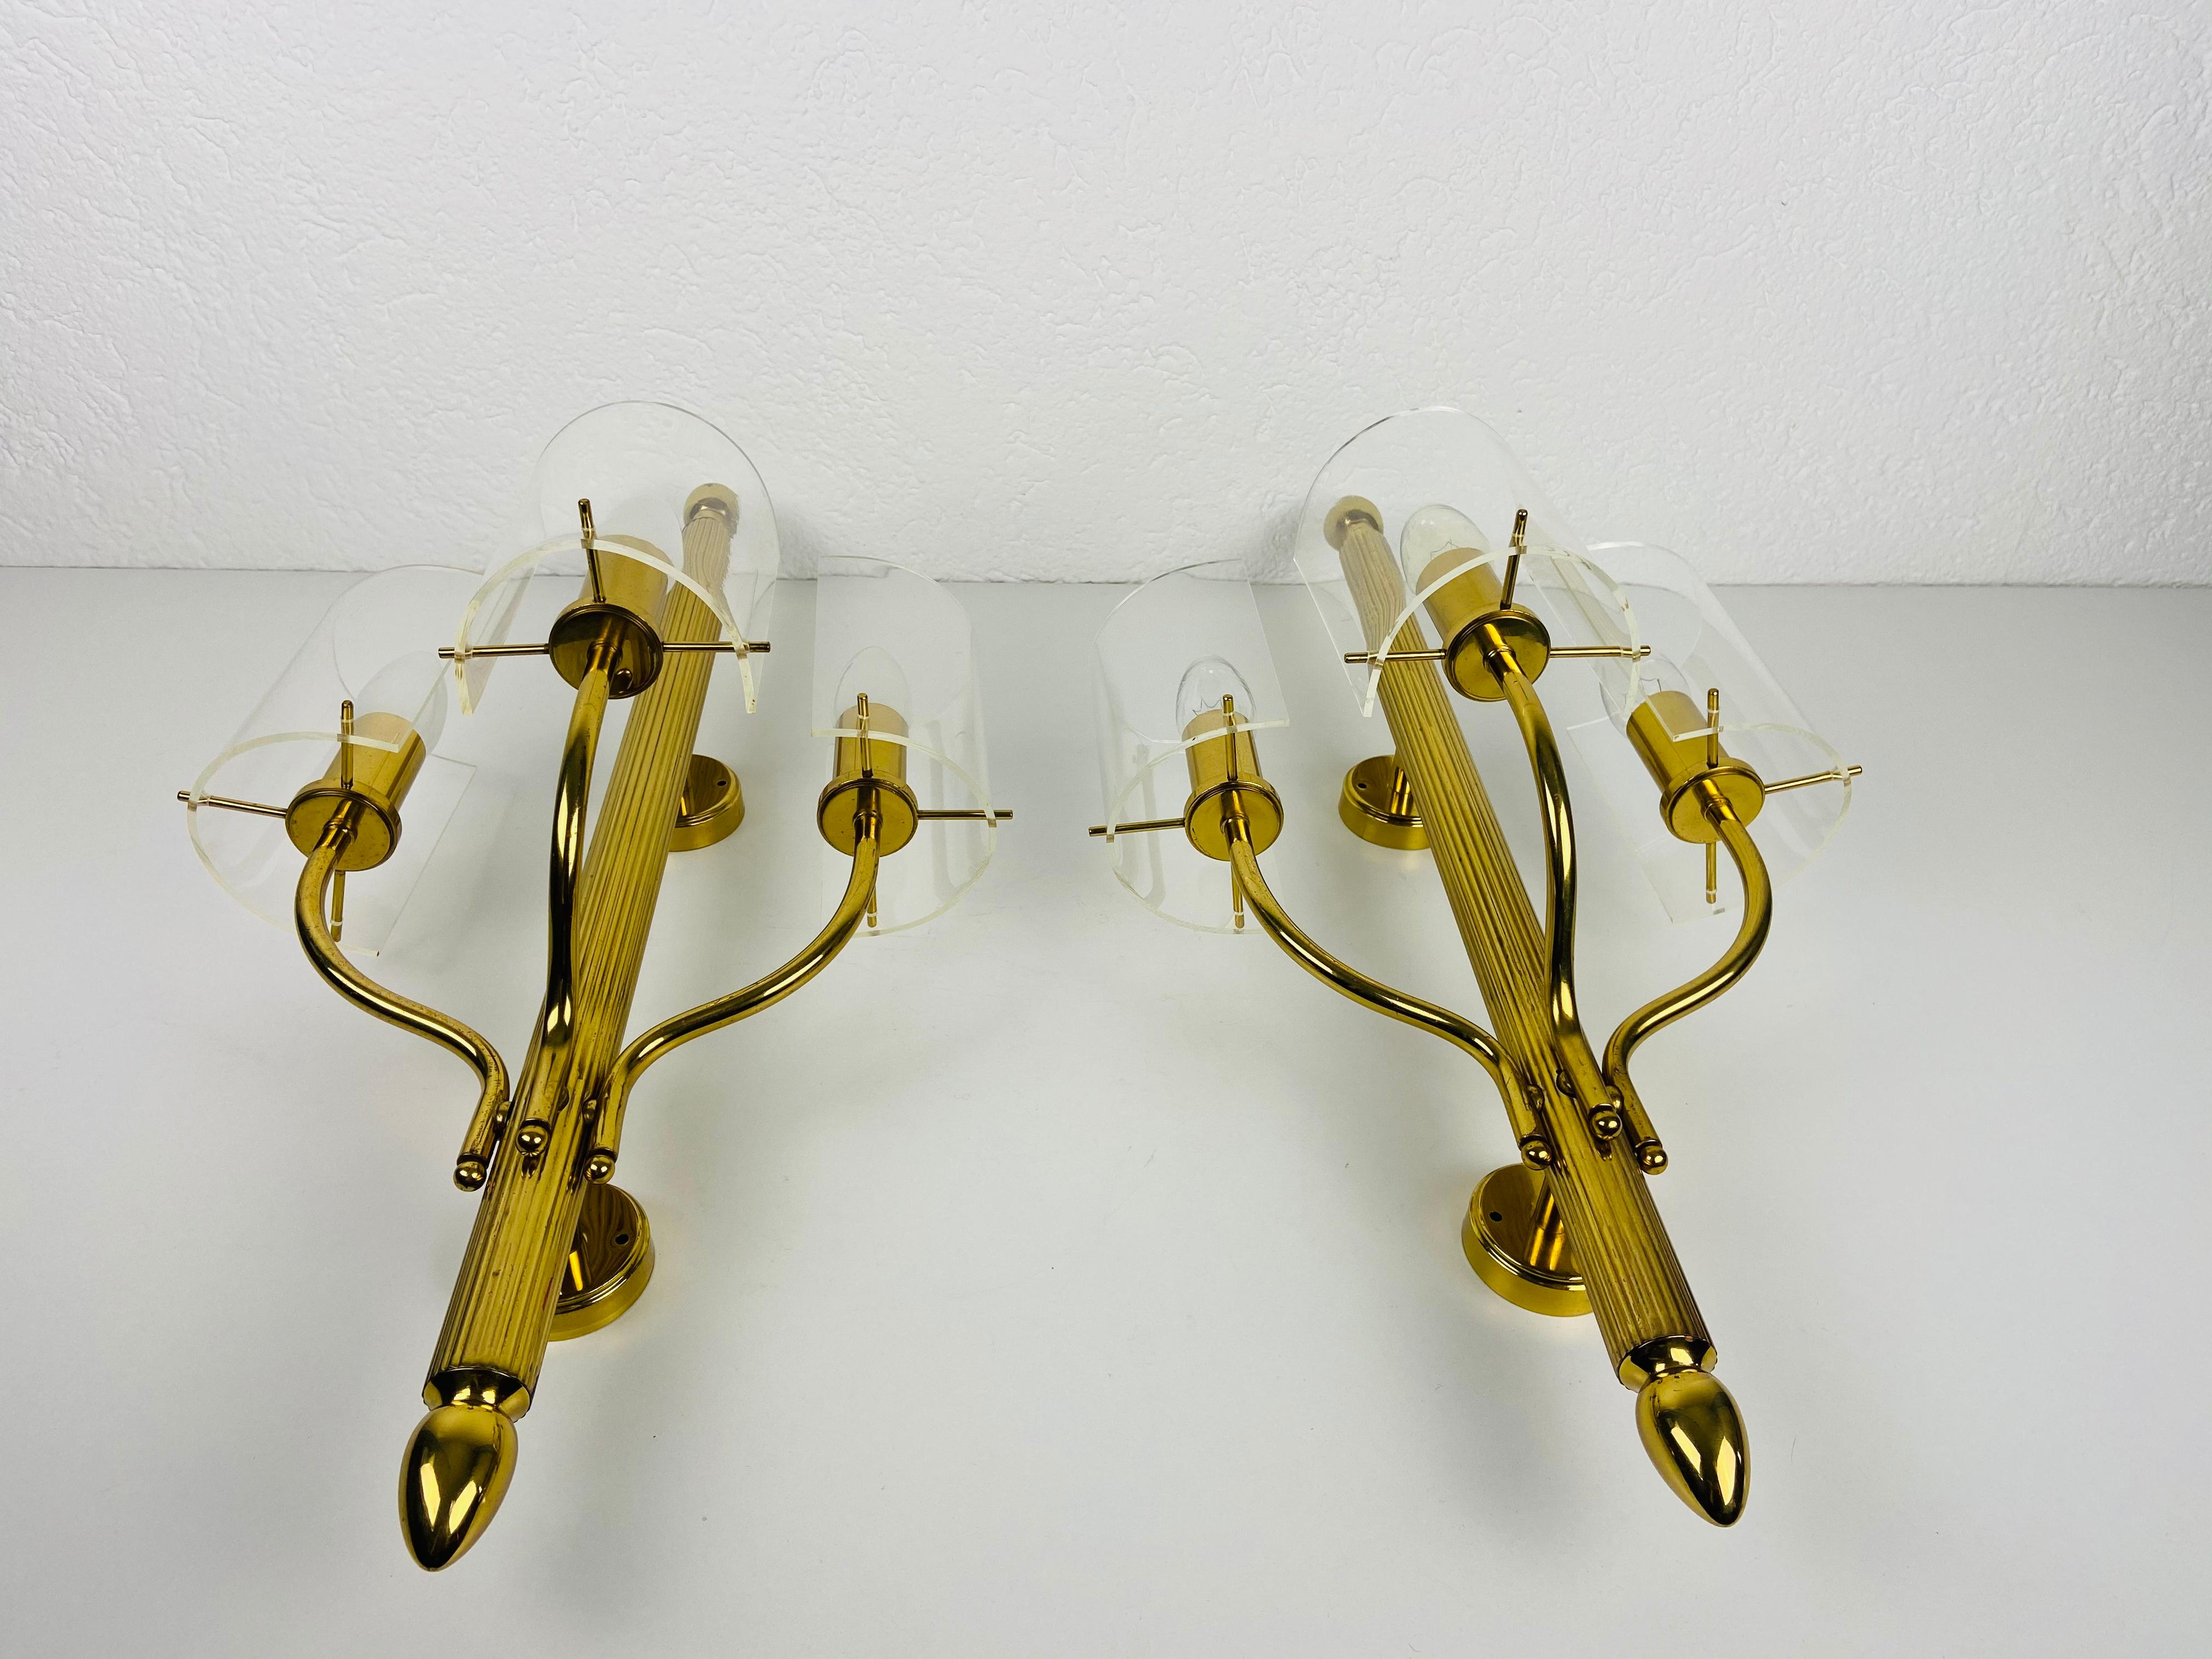 Huge Pair of Mid-Century Modern Brass and Perspex Cinema Wall Lamps, 1950s For Sale 2